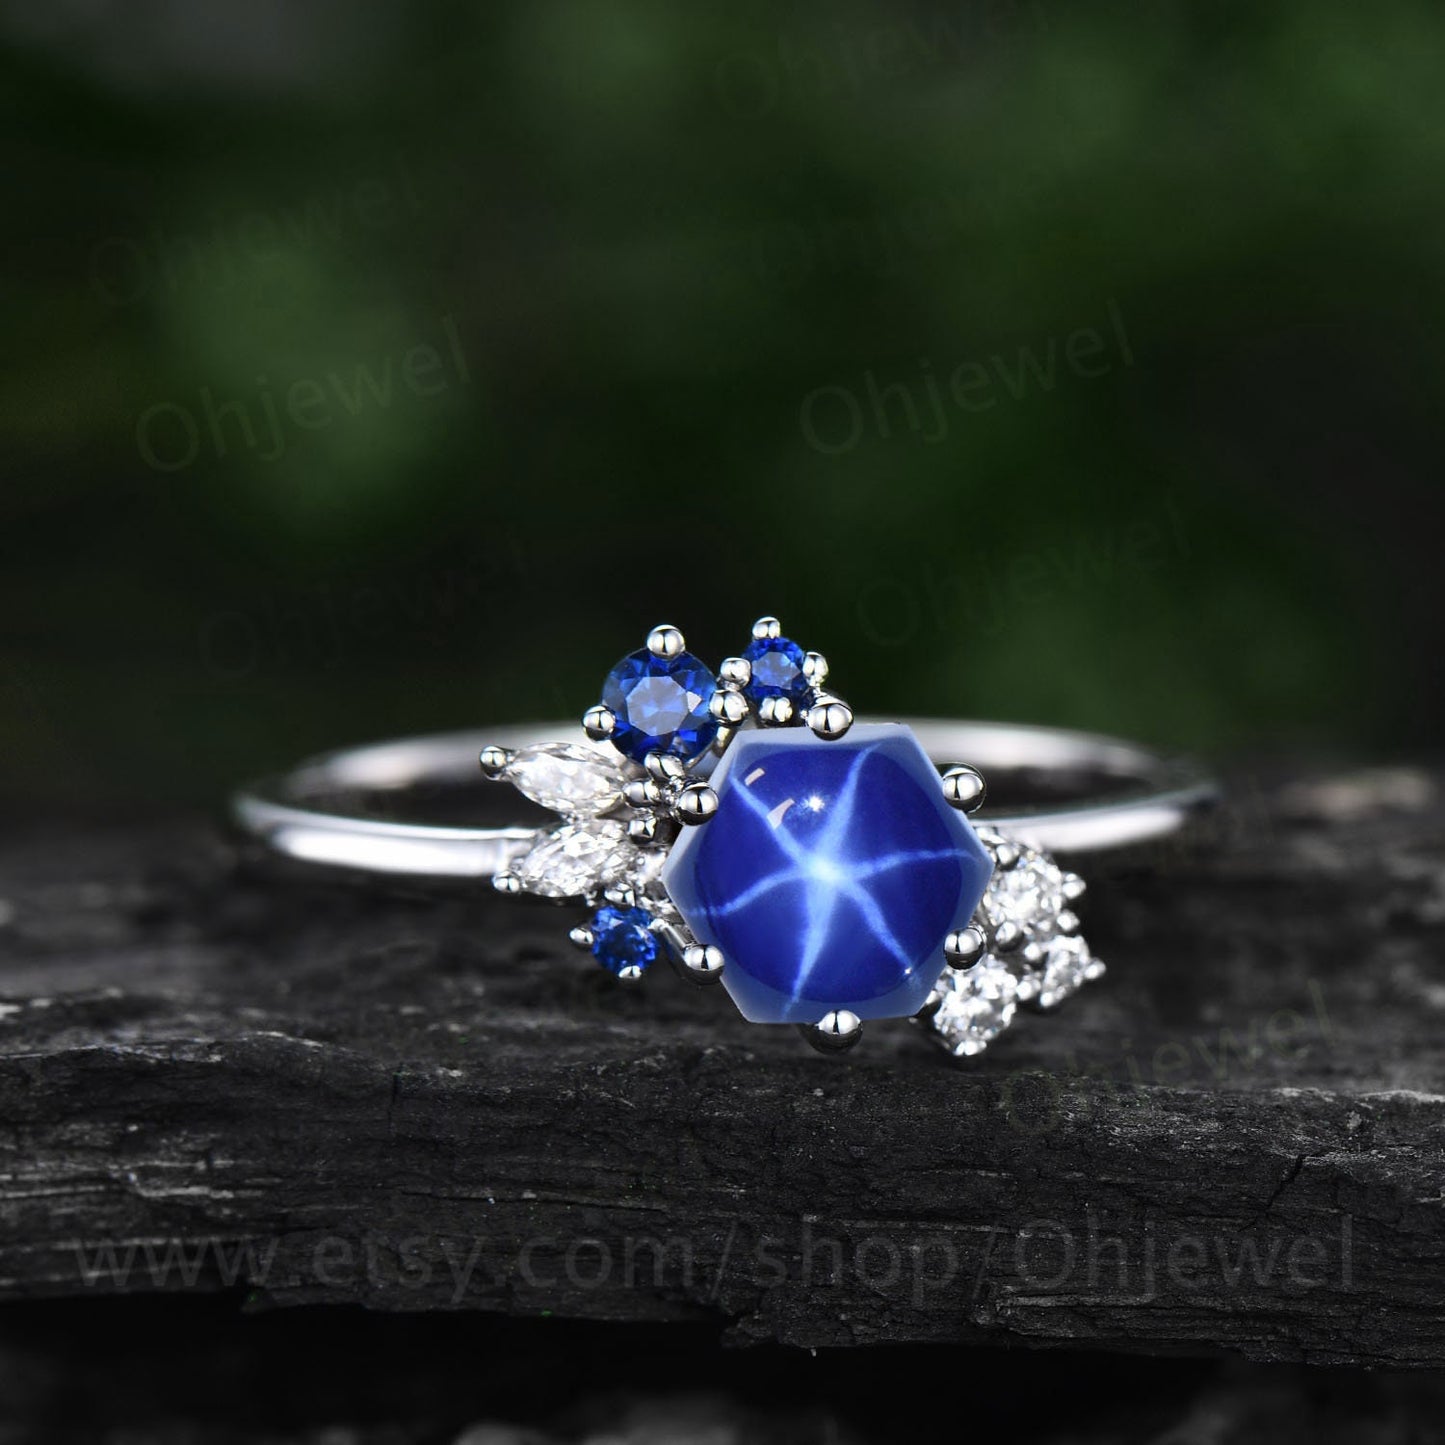 Hexagon blue star sapphire ring vintage unique cluster sapphire engagement ring rose gold dainty moissanite bridal anniversary ring gift